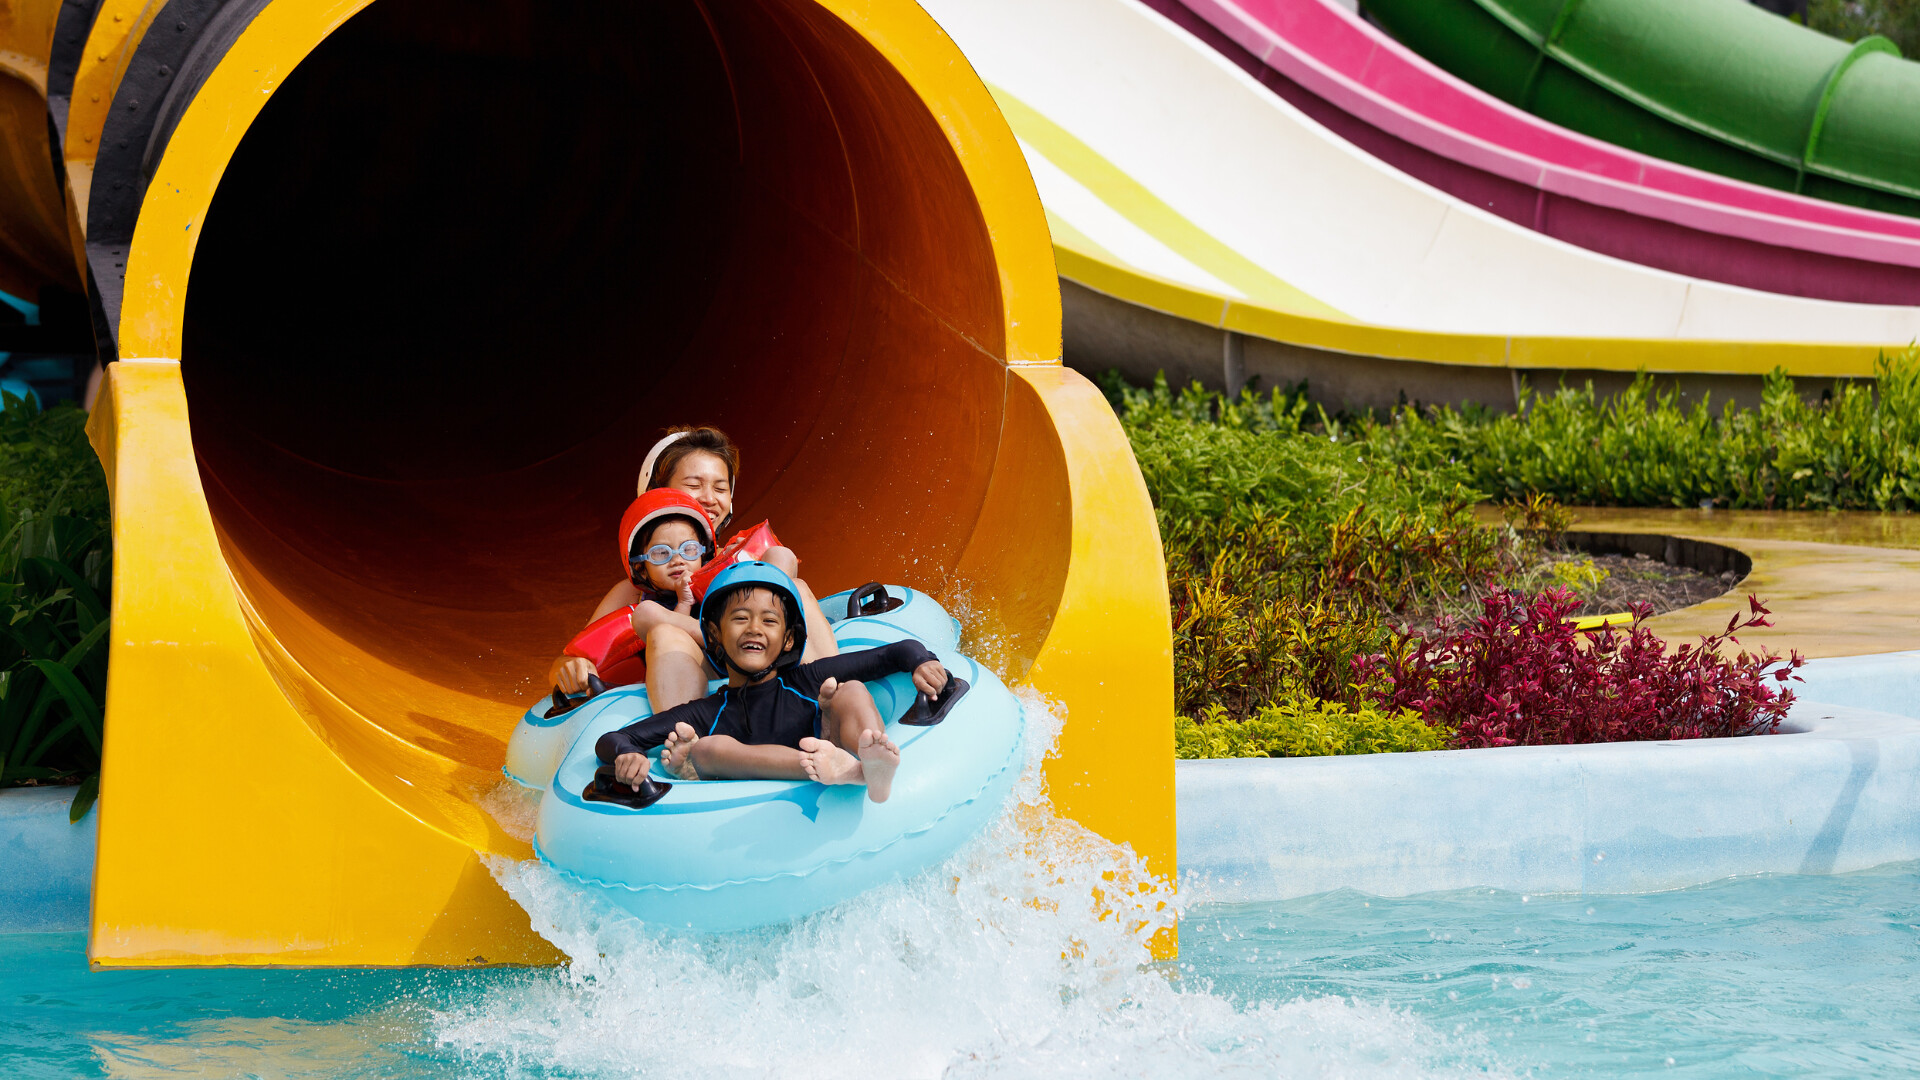 The Top 6 Risk Management Tips for Water Parks